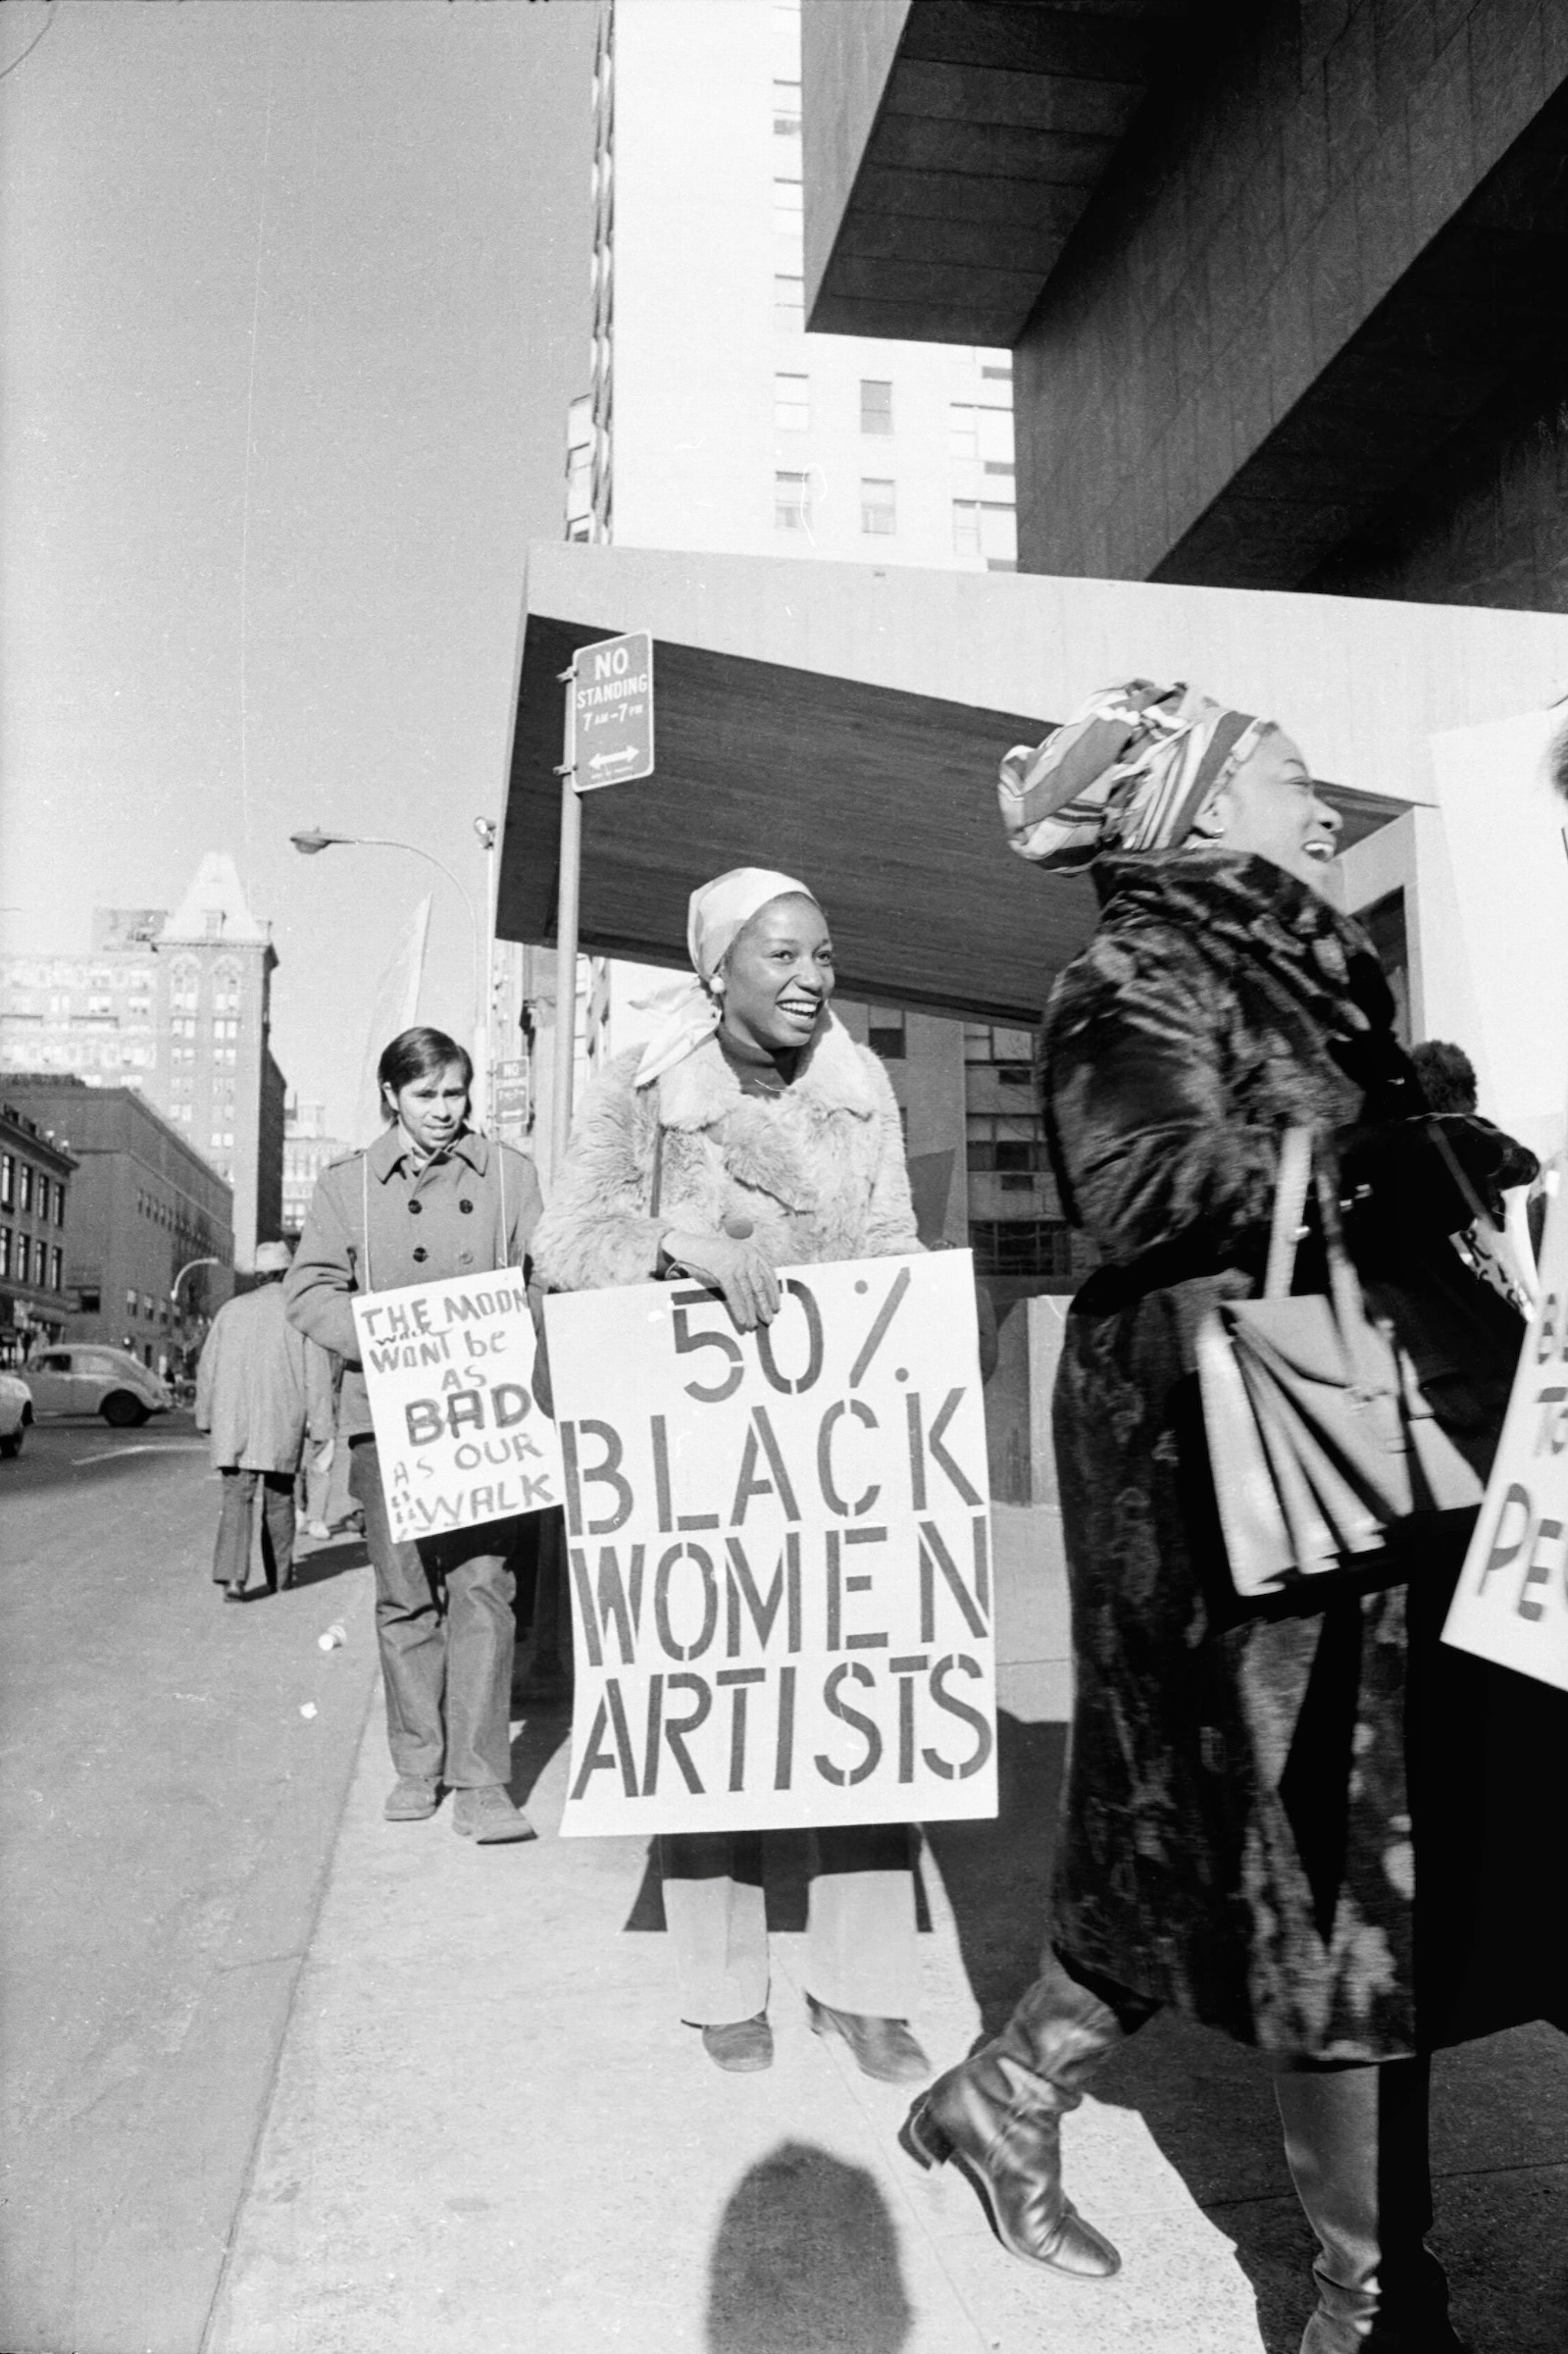 Jan van Raay (American, born 1942). Faith Ringgold (right) and Michele Wallace (middle) at Art Workers Coalition Protest, Whitney Museum, 1971. Digital C-print. Courtesy of Jan van Raay, Portland, OR, 305-37. © Jan van Raay